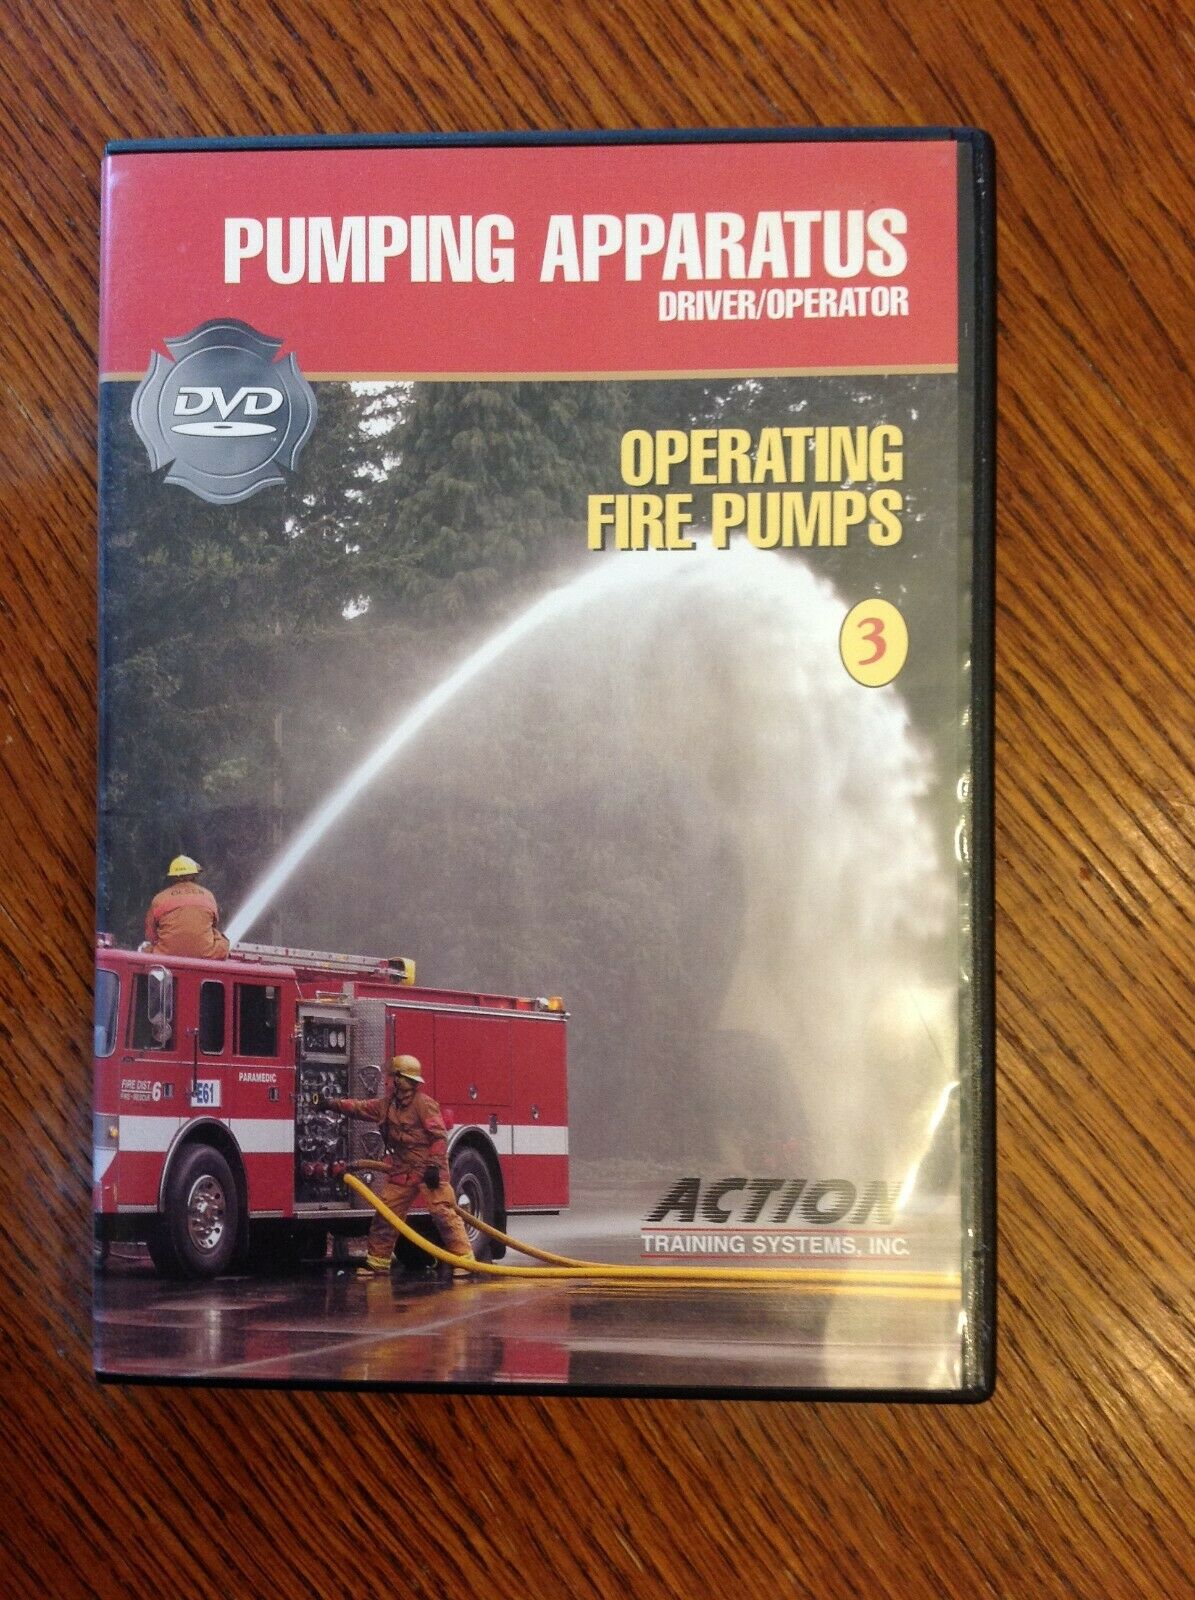 Action Training Dvd Fire Fighter Pumping Apparatus - Apparatus Inspection